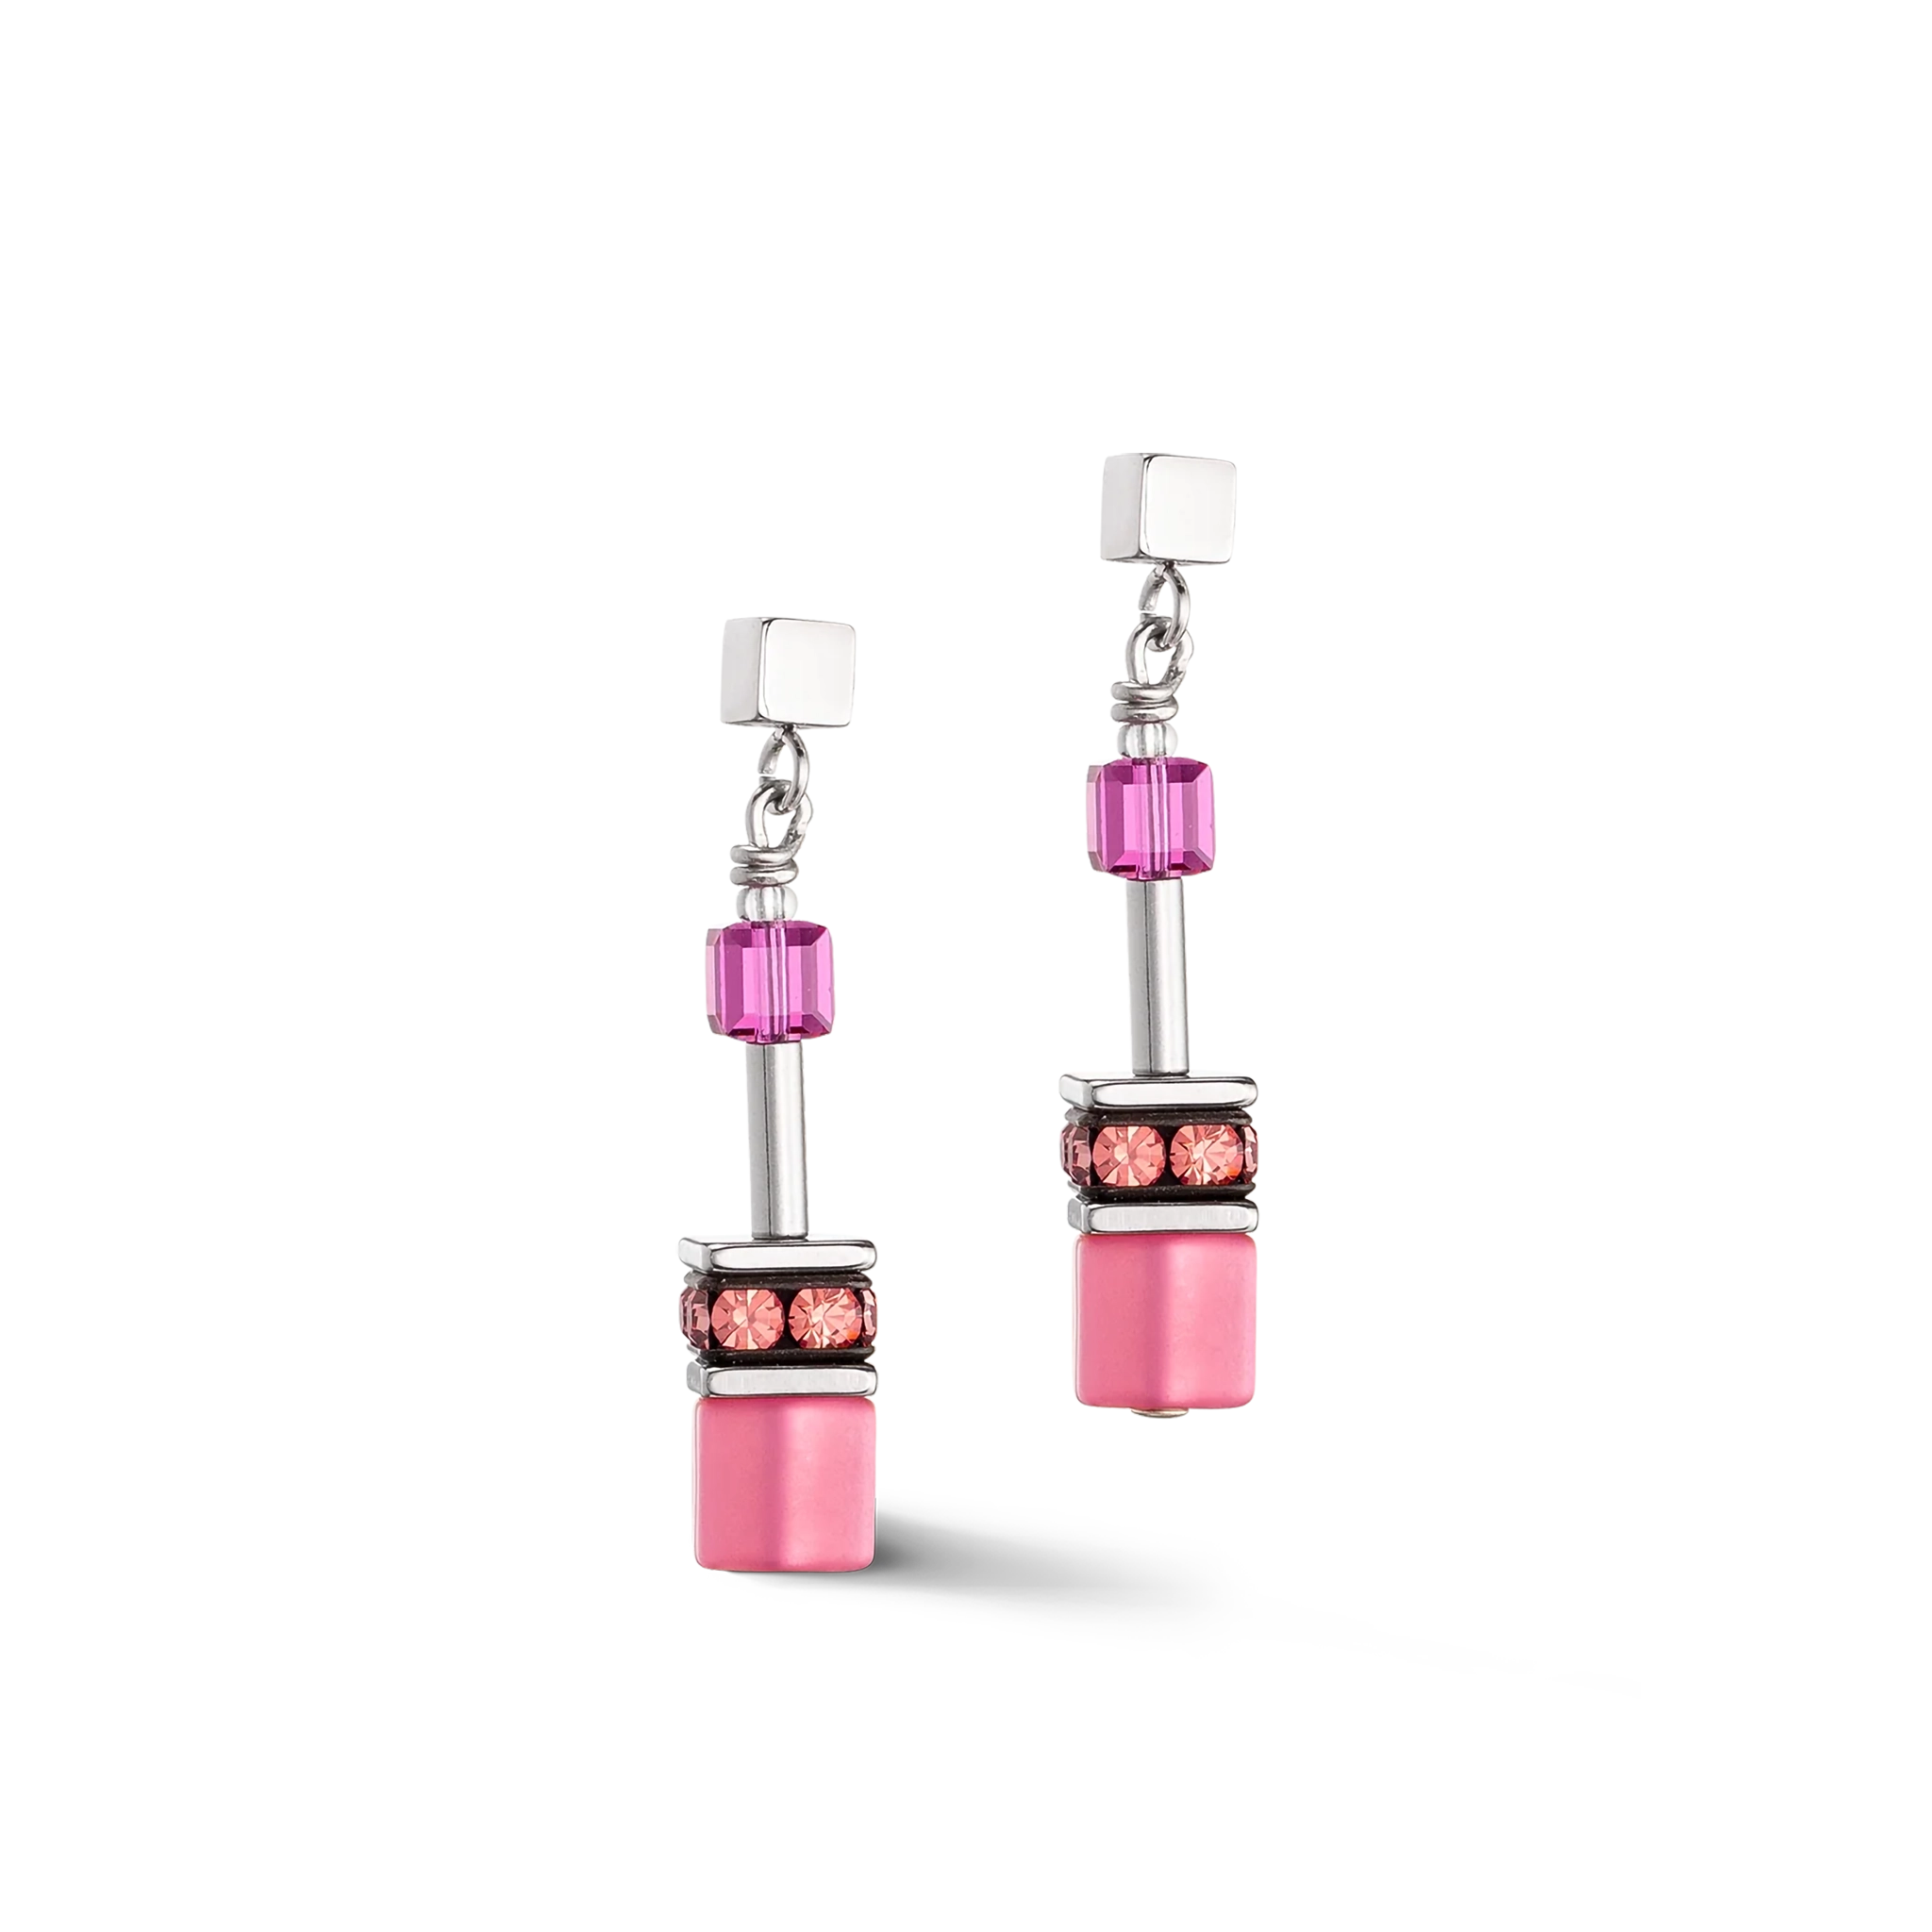 A steel pair of earrings with bright pink cube shaped stones and glass beads